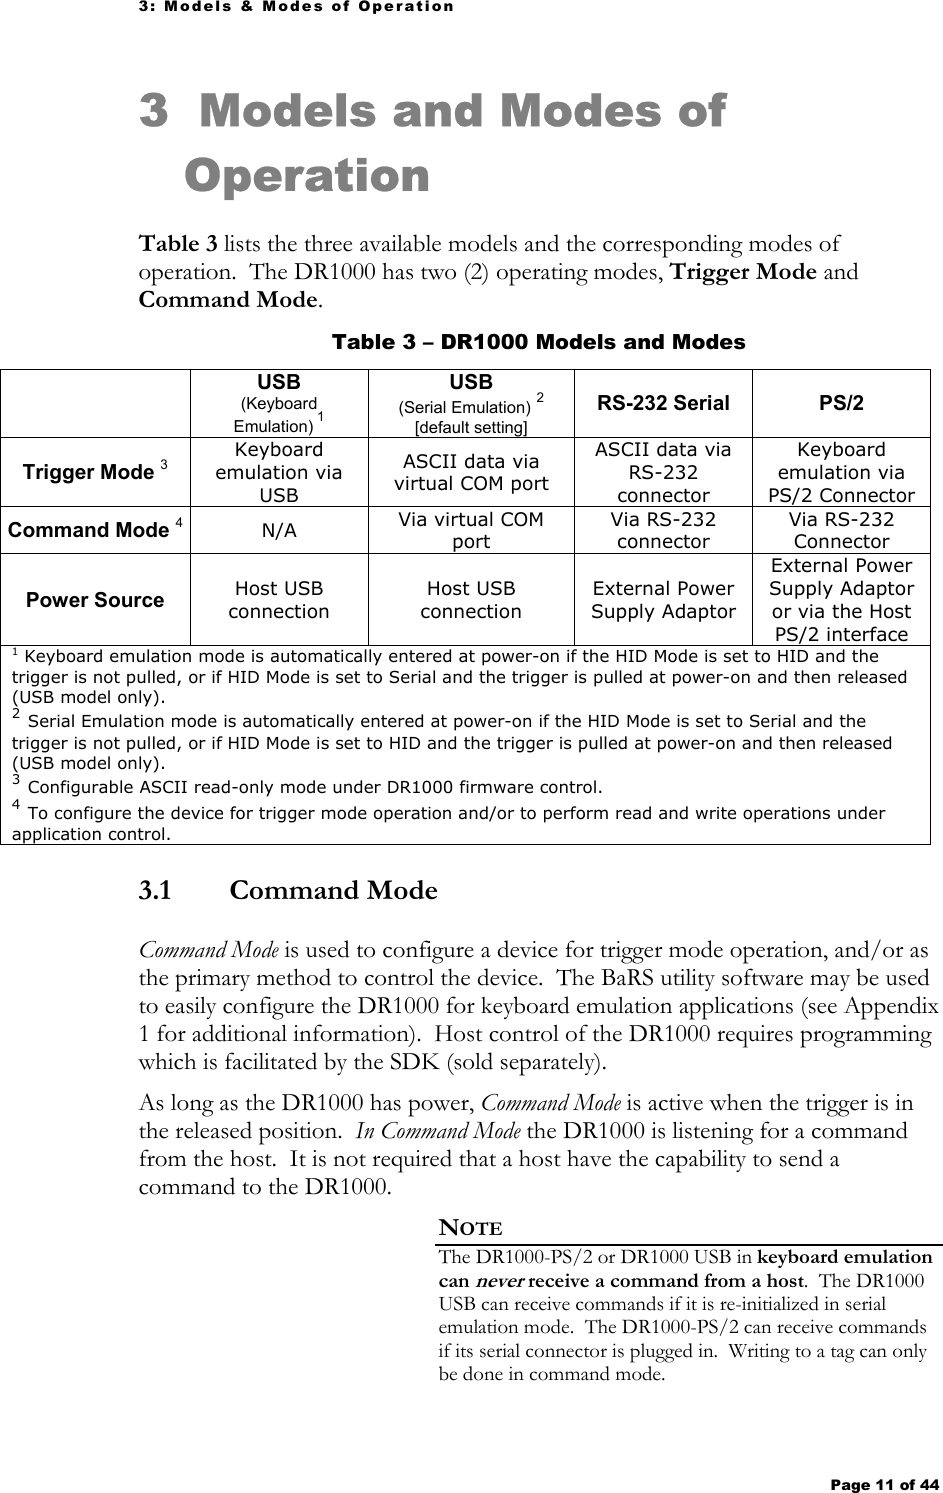 3: Models &amp; Modes of Operation Page 11 of 44   3 Models and Modes of Operation Table 3 lists the three available models and the corresponding modes of operation.  The DR1000 has two (2) operating modes, Trigger Mode and Command Mode.  Table 3 – DR1000 Models and Modes  USB (Keyboard Emulation) 1 USB  (Serial Emulation) 2 [default setting] RS-232 Serial  PS/2 Trigger Mode 3 Keyboard emulation via USB ASCII data via virtual COM port ASCII data via RS-232 connector Keyboard emulation via PS/2 Connector Command Mode 4 N/A  Via virtual COM port Via RS-232 connector Via RS-232 Connector Power Source  Host USB connection Host USB connection External Power Supply Adaptor External Power Supply Adaptor or via the Host PS/2 interface 1 Keyboard emulation mode is automatically entered at power-on if the HID Mode is set to HID and the trigger is not pulled, or if HID Mode is set to Serial and the trigger is pulled at power-on and then released (USB model only). 2 Serial Emulation mode is automatically entered at power-on if the HID Mode is set to Serial and the trigger is not pulled, or if HID Mode is set to HID and the trigger is pulled at power-on and then released (USB model only). 3 Configurable ASCII read-only mode under DR1000 firmware control. 4 To configure the device for trigger mode operation and/or to perform read and write operations under application control. 3.1  Command Mode Command Mode is used to configure a device for trigger mode operation, and/or as the primary method to control the device.  The BaRS utility software may be used to easily configure the DR1000 for keyboard emulation applications (see Appendix 1 for additional information).  Host control of the DR1000 requires programming which is facilitated by the SDK (sold separately). As long as the DR1000 has power, Command Mode is active when the trigger is in the released position.  In Command Mode the DR1000 is listening for a command from the host.  It is not required that a host have the capability to send a command to the DR1000.   NOTE The DR1000-PS/2 or DR1000 USB in keyboard emulation can never receive a command from a host.  The DR1000 USB can receive commands if it is re-initialized in serial emulation mode.  The DR1000-PS/2 can receive commands if its serial connector is plugged in.  Writing to a tag can only be done in command mode. 